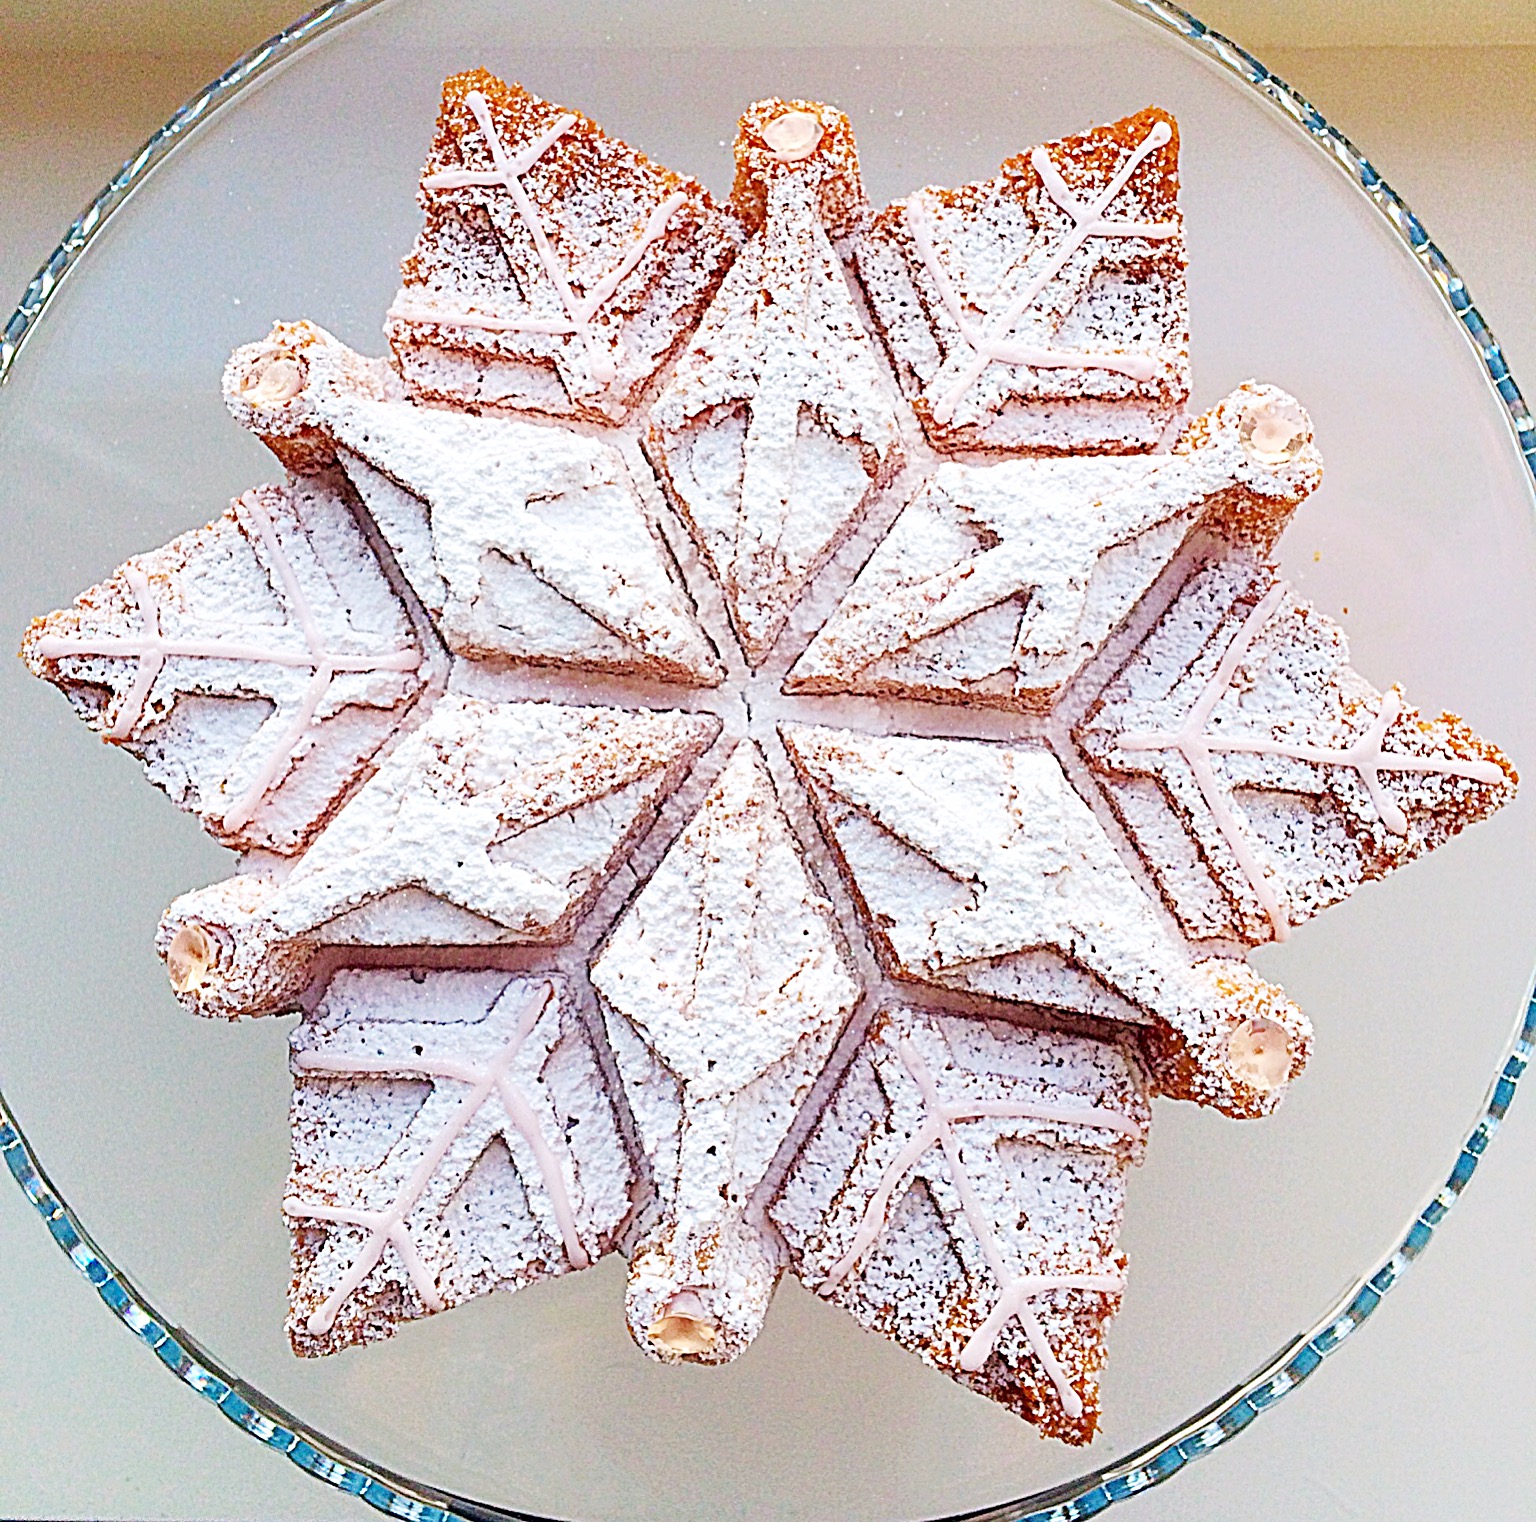 My cake got completely stuck in my new snowflake pan, so I turned